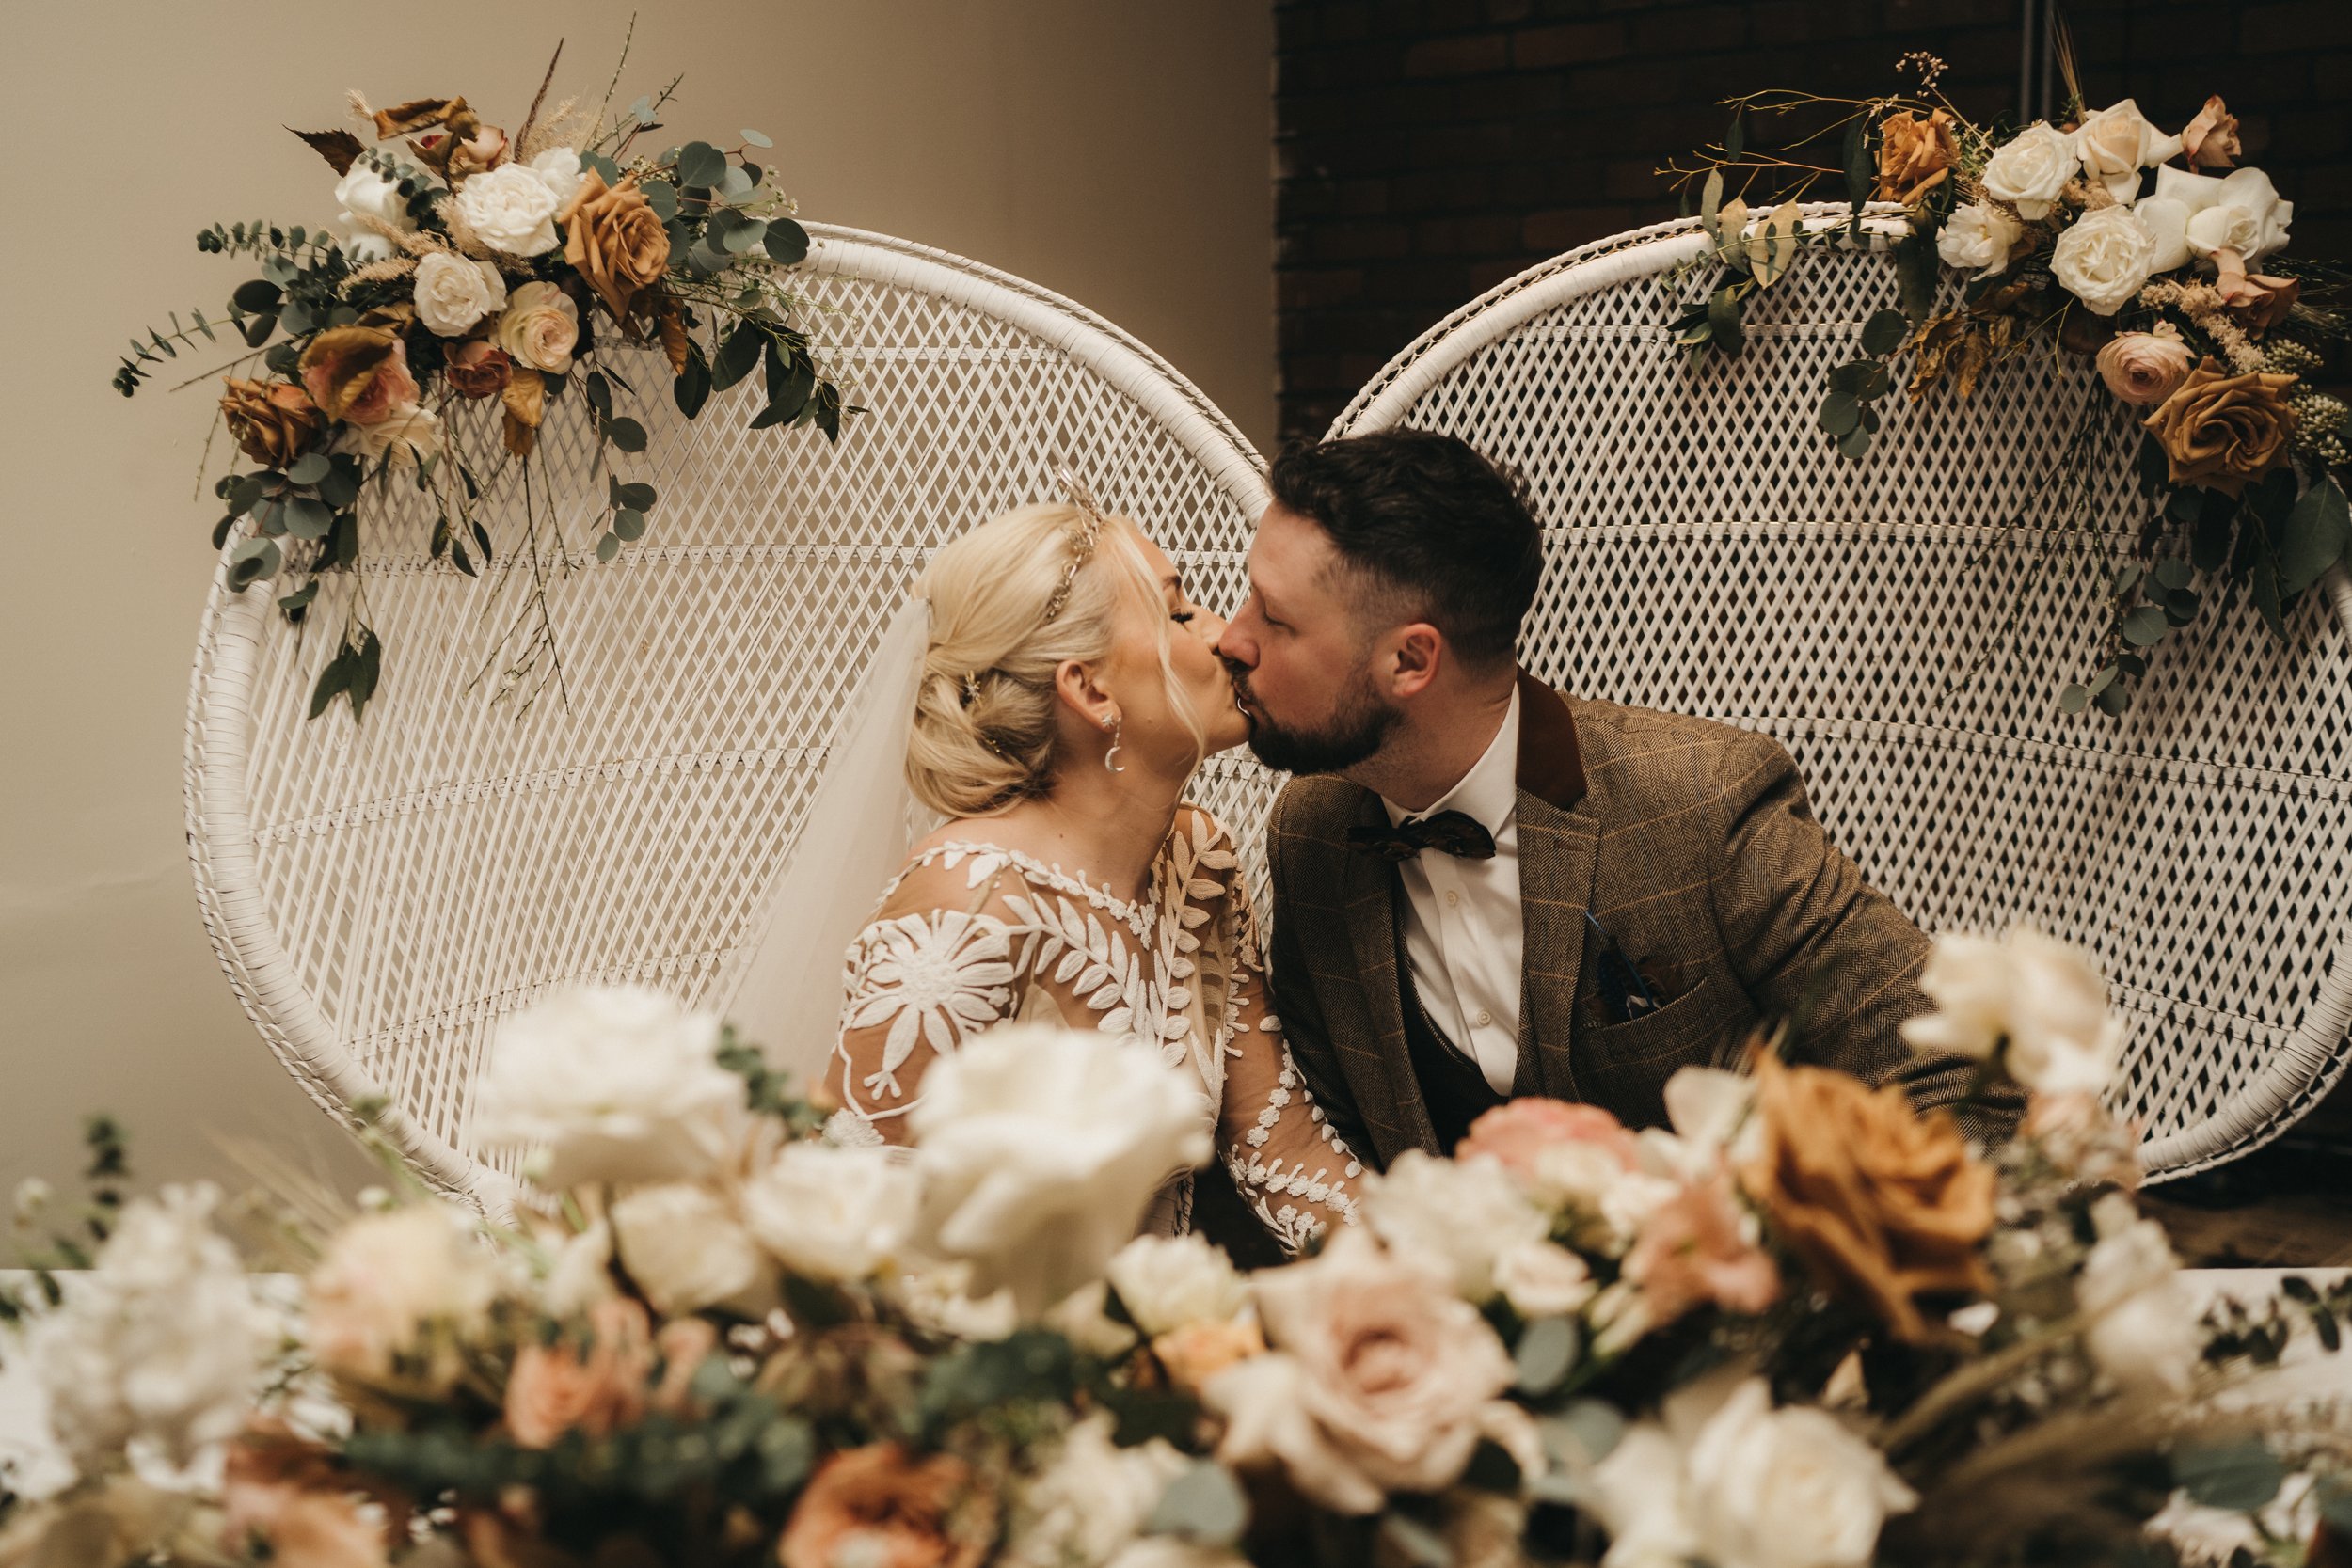  Photographer Credit: Mariola Zolads Photography  In Victoria Warehouse, the bride and groom are sat on large white wicker chairs sharing a kiss.   A floral installation on the table in front of the couple is made up of creams, pinks and greens and i